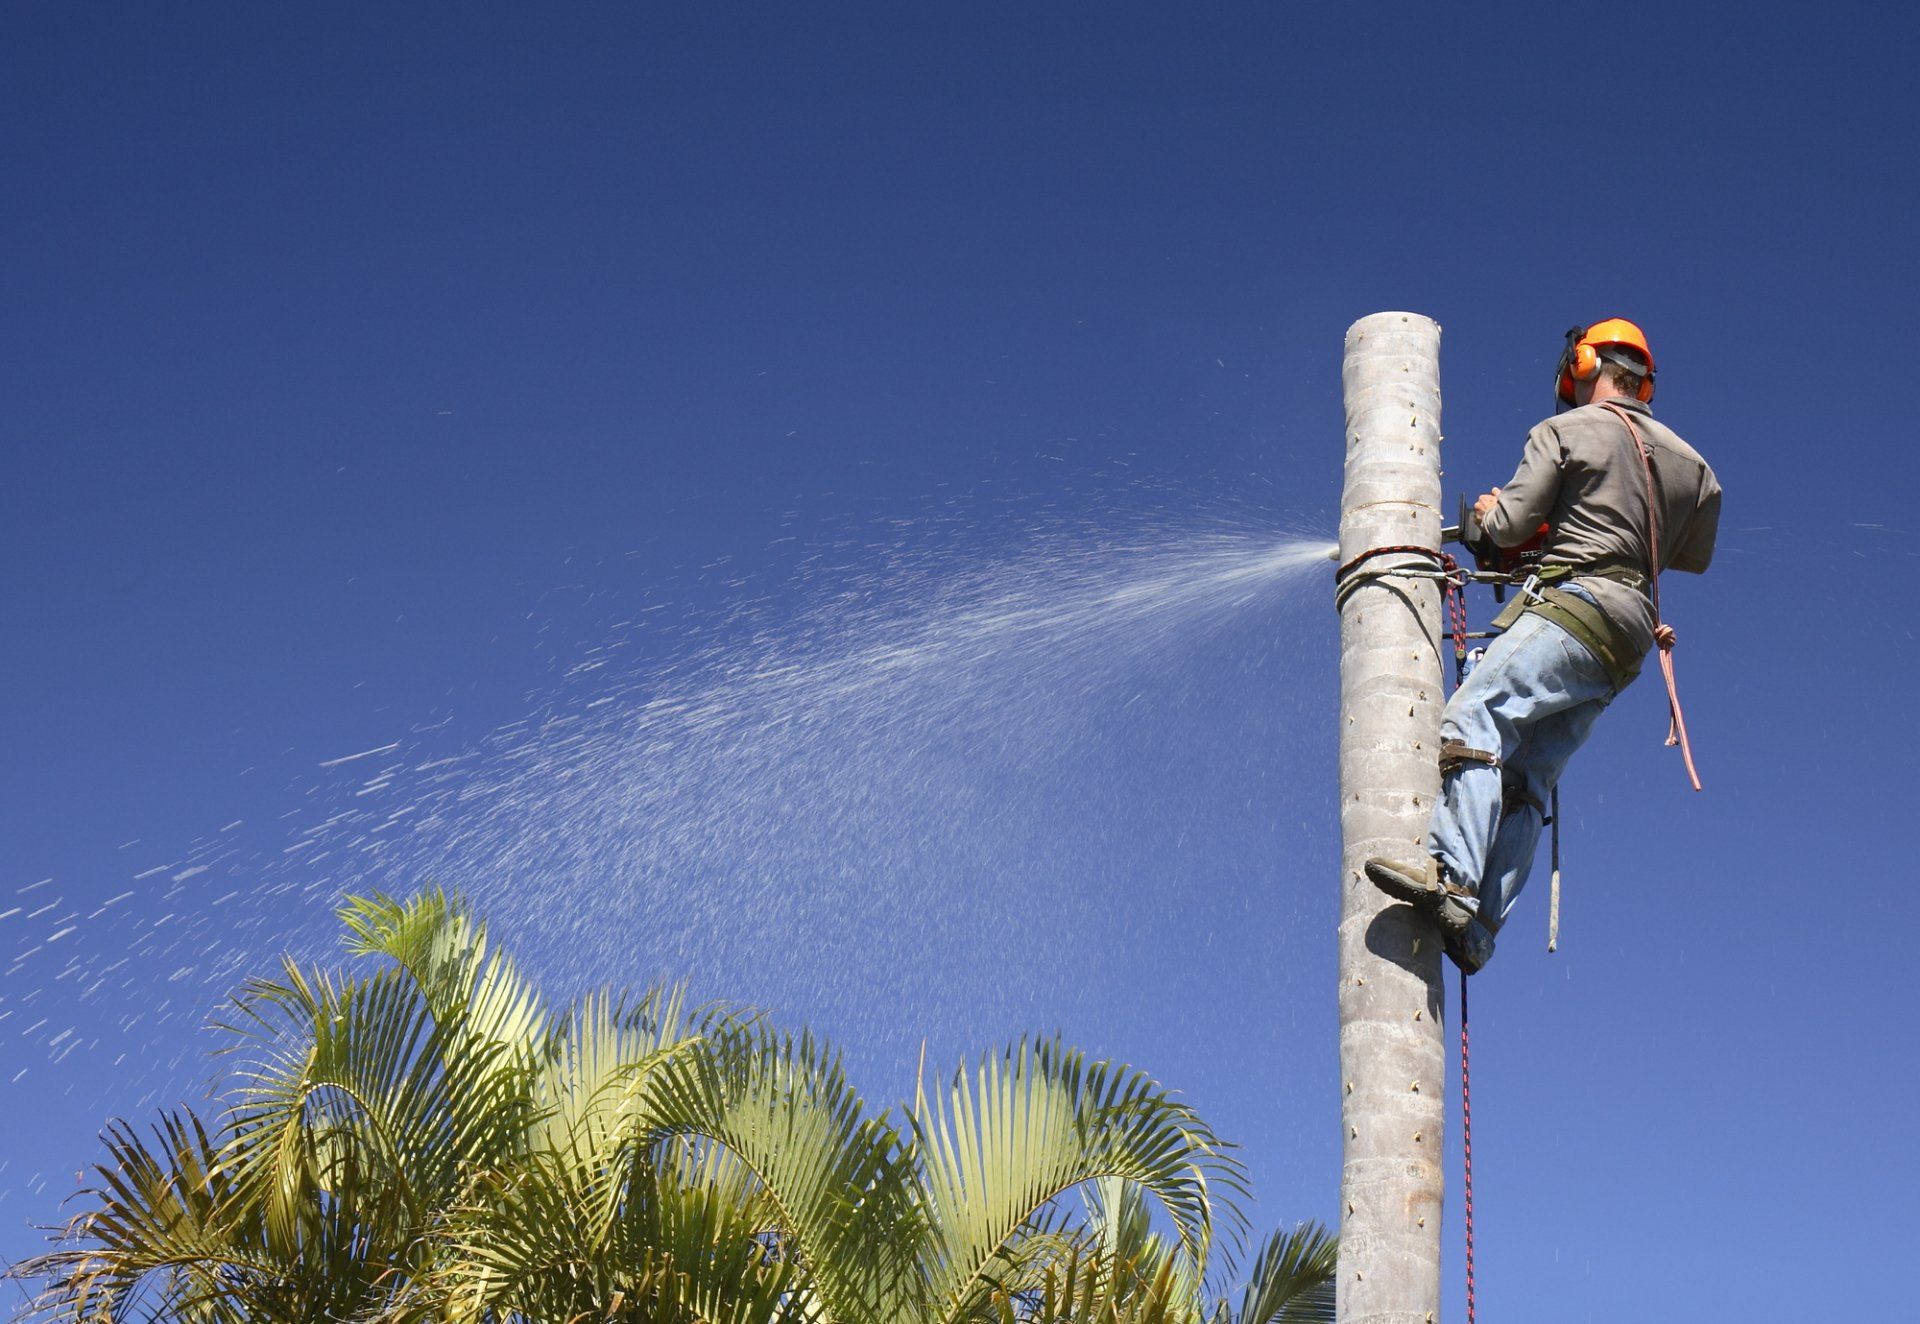 Real Tree Trimming & Landscaping, Inc. arborist cutting down a palm tree in Deerfield Beach FL piece by piece